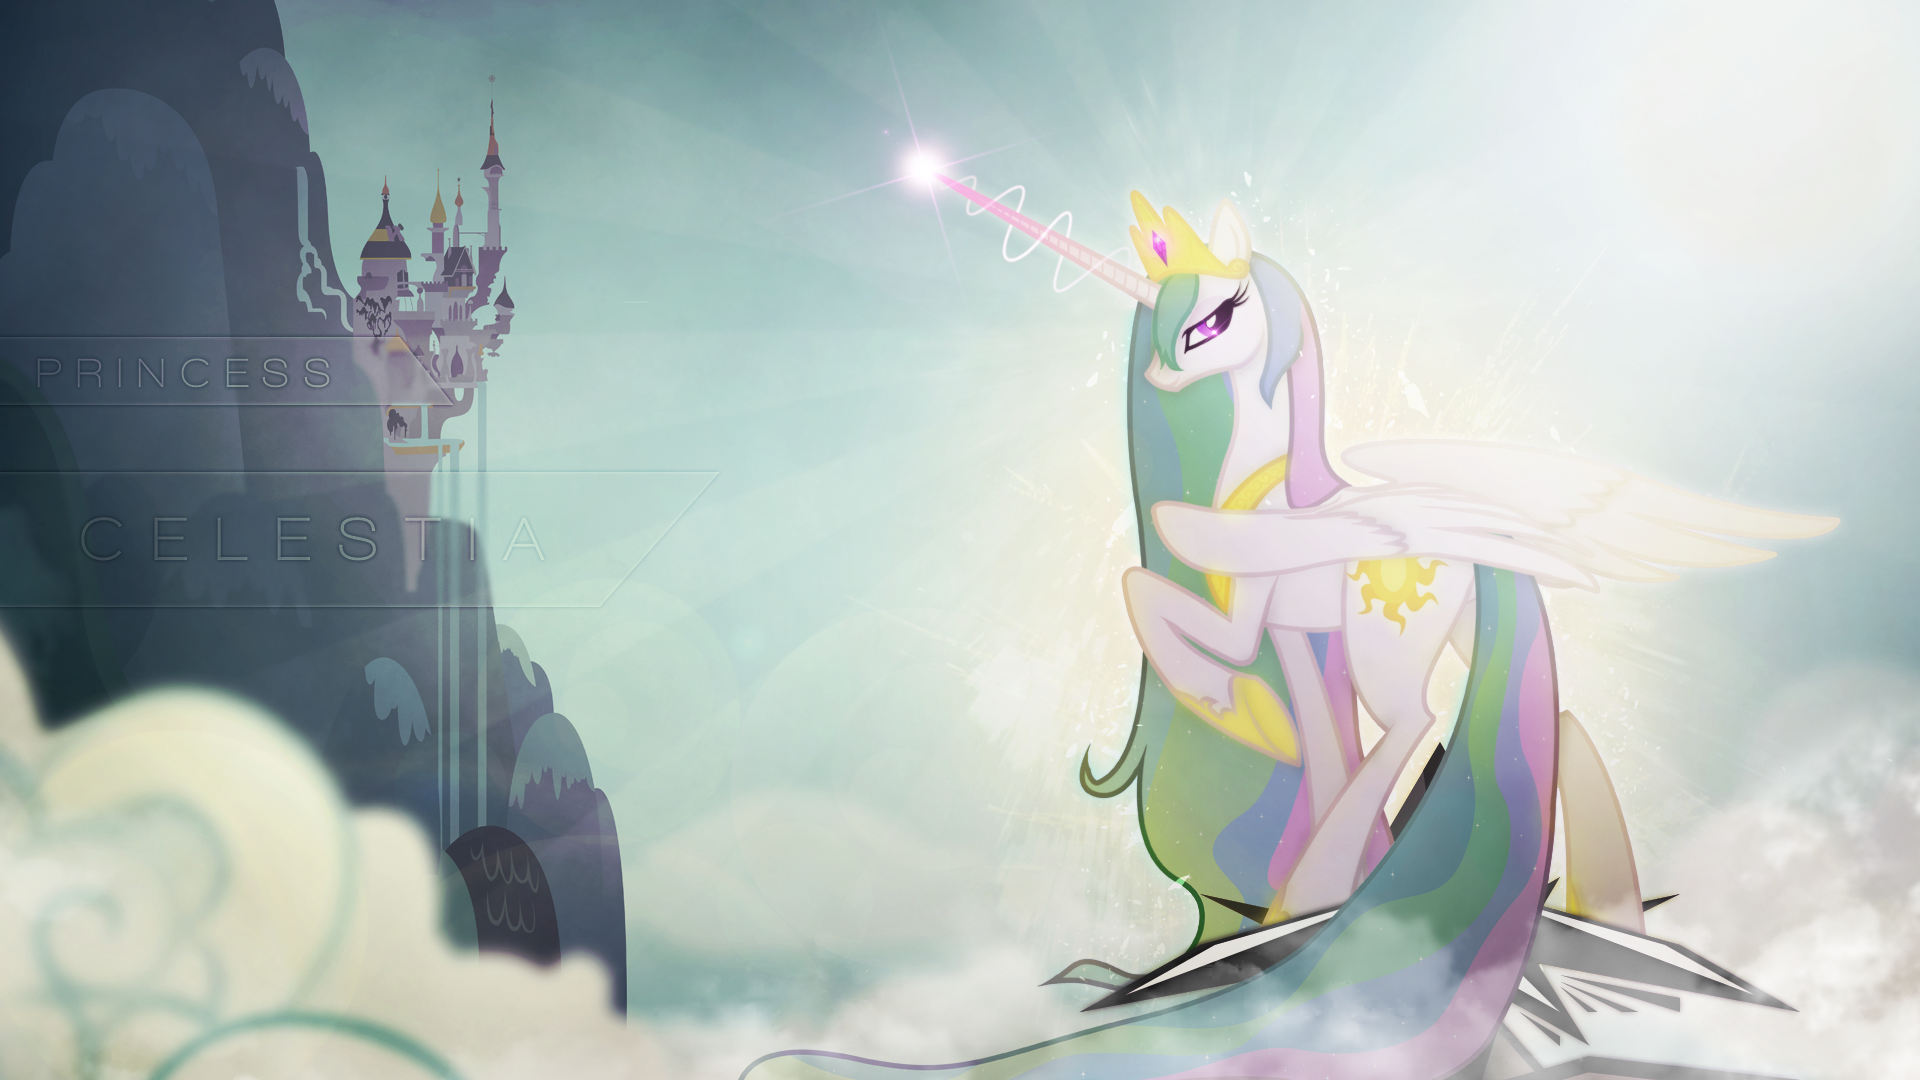 Wallpaper ~ The great Celestia. by emeralddarkness, Mackaged and Qsteel